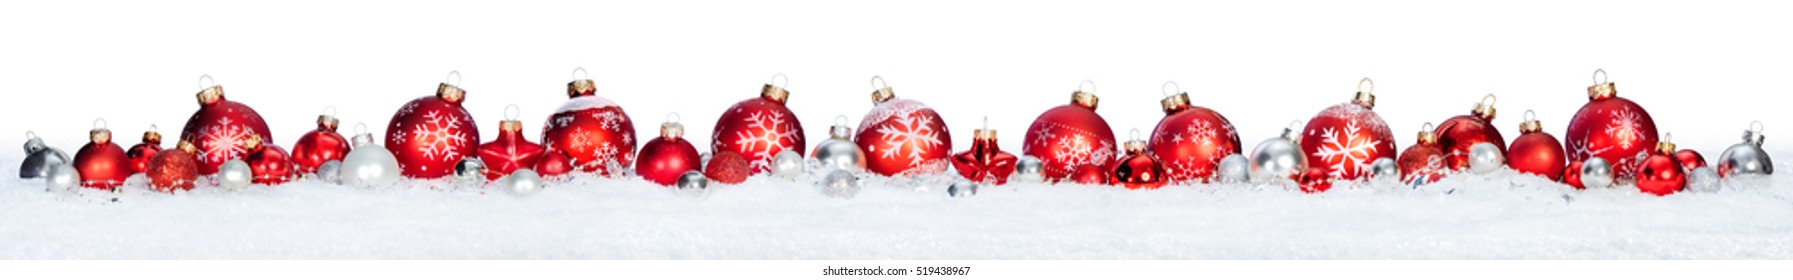 Red Balls In A Row Isolated On Snow - Christmas Border
 - Shutterstock ID 519438967